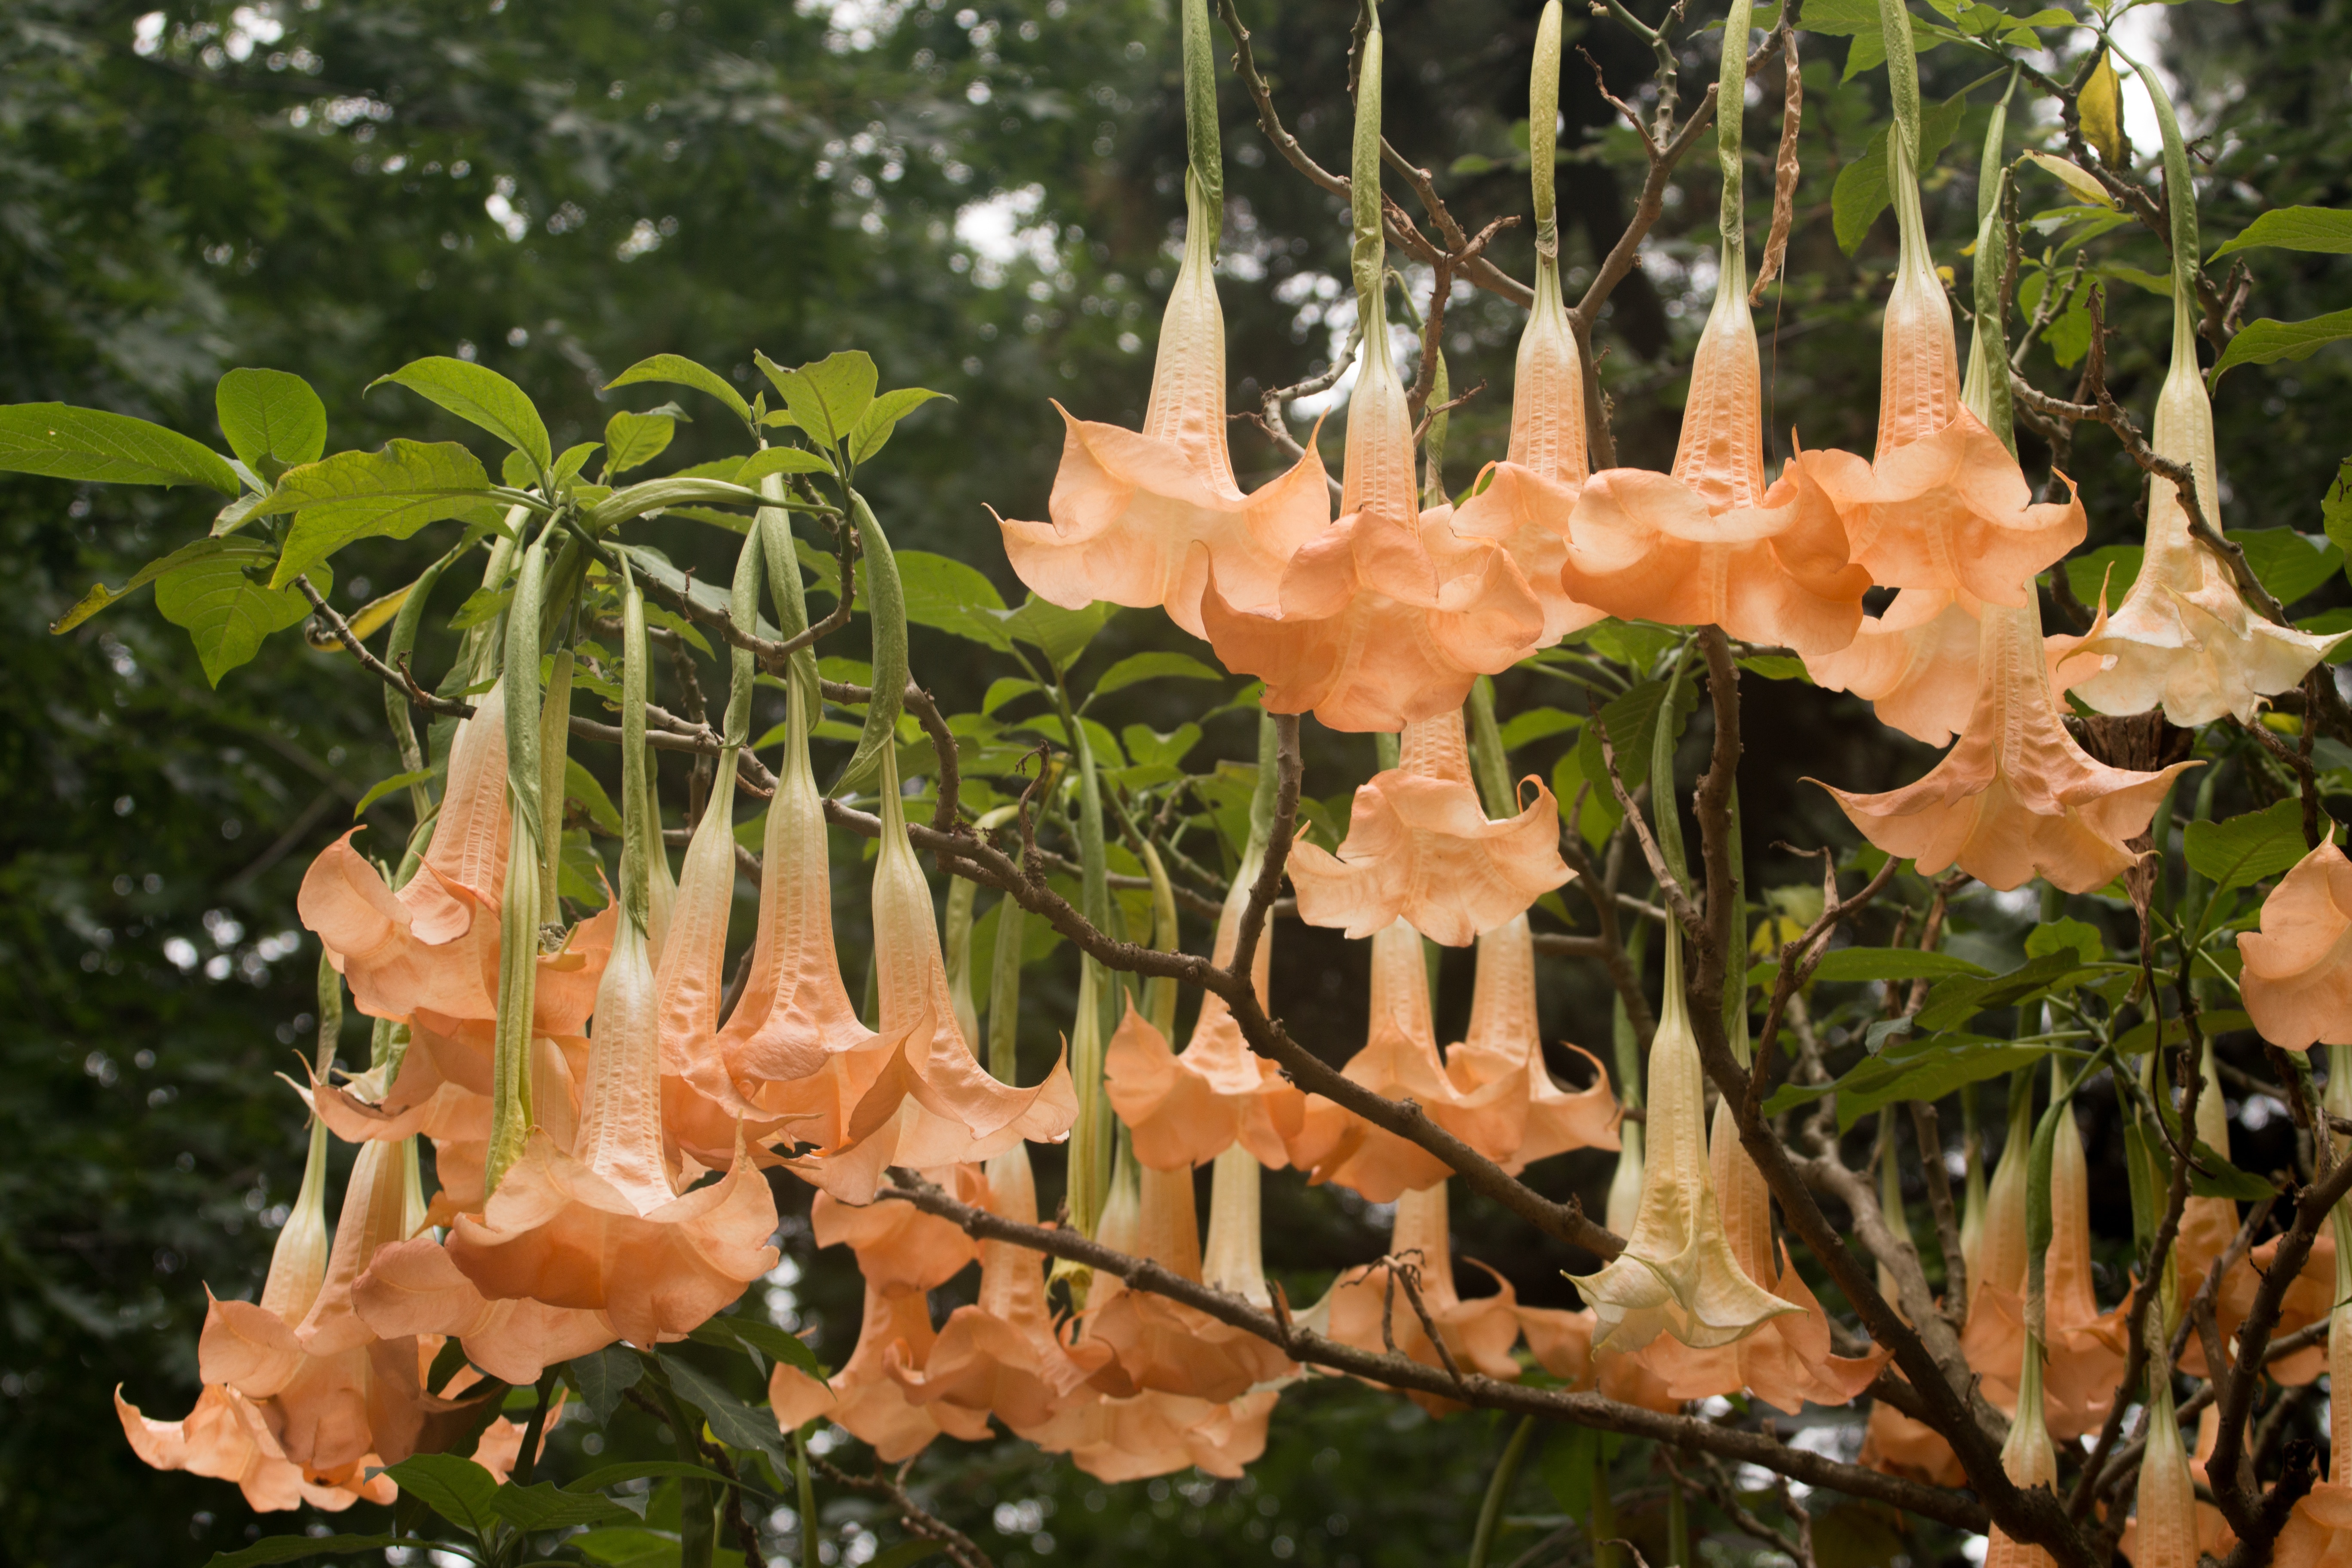 Close up view of the Brugmansia suaveolens flower on a garden.